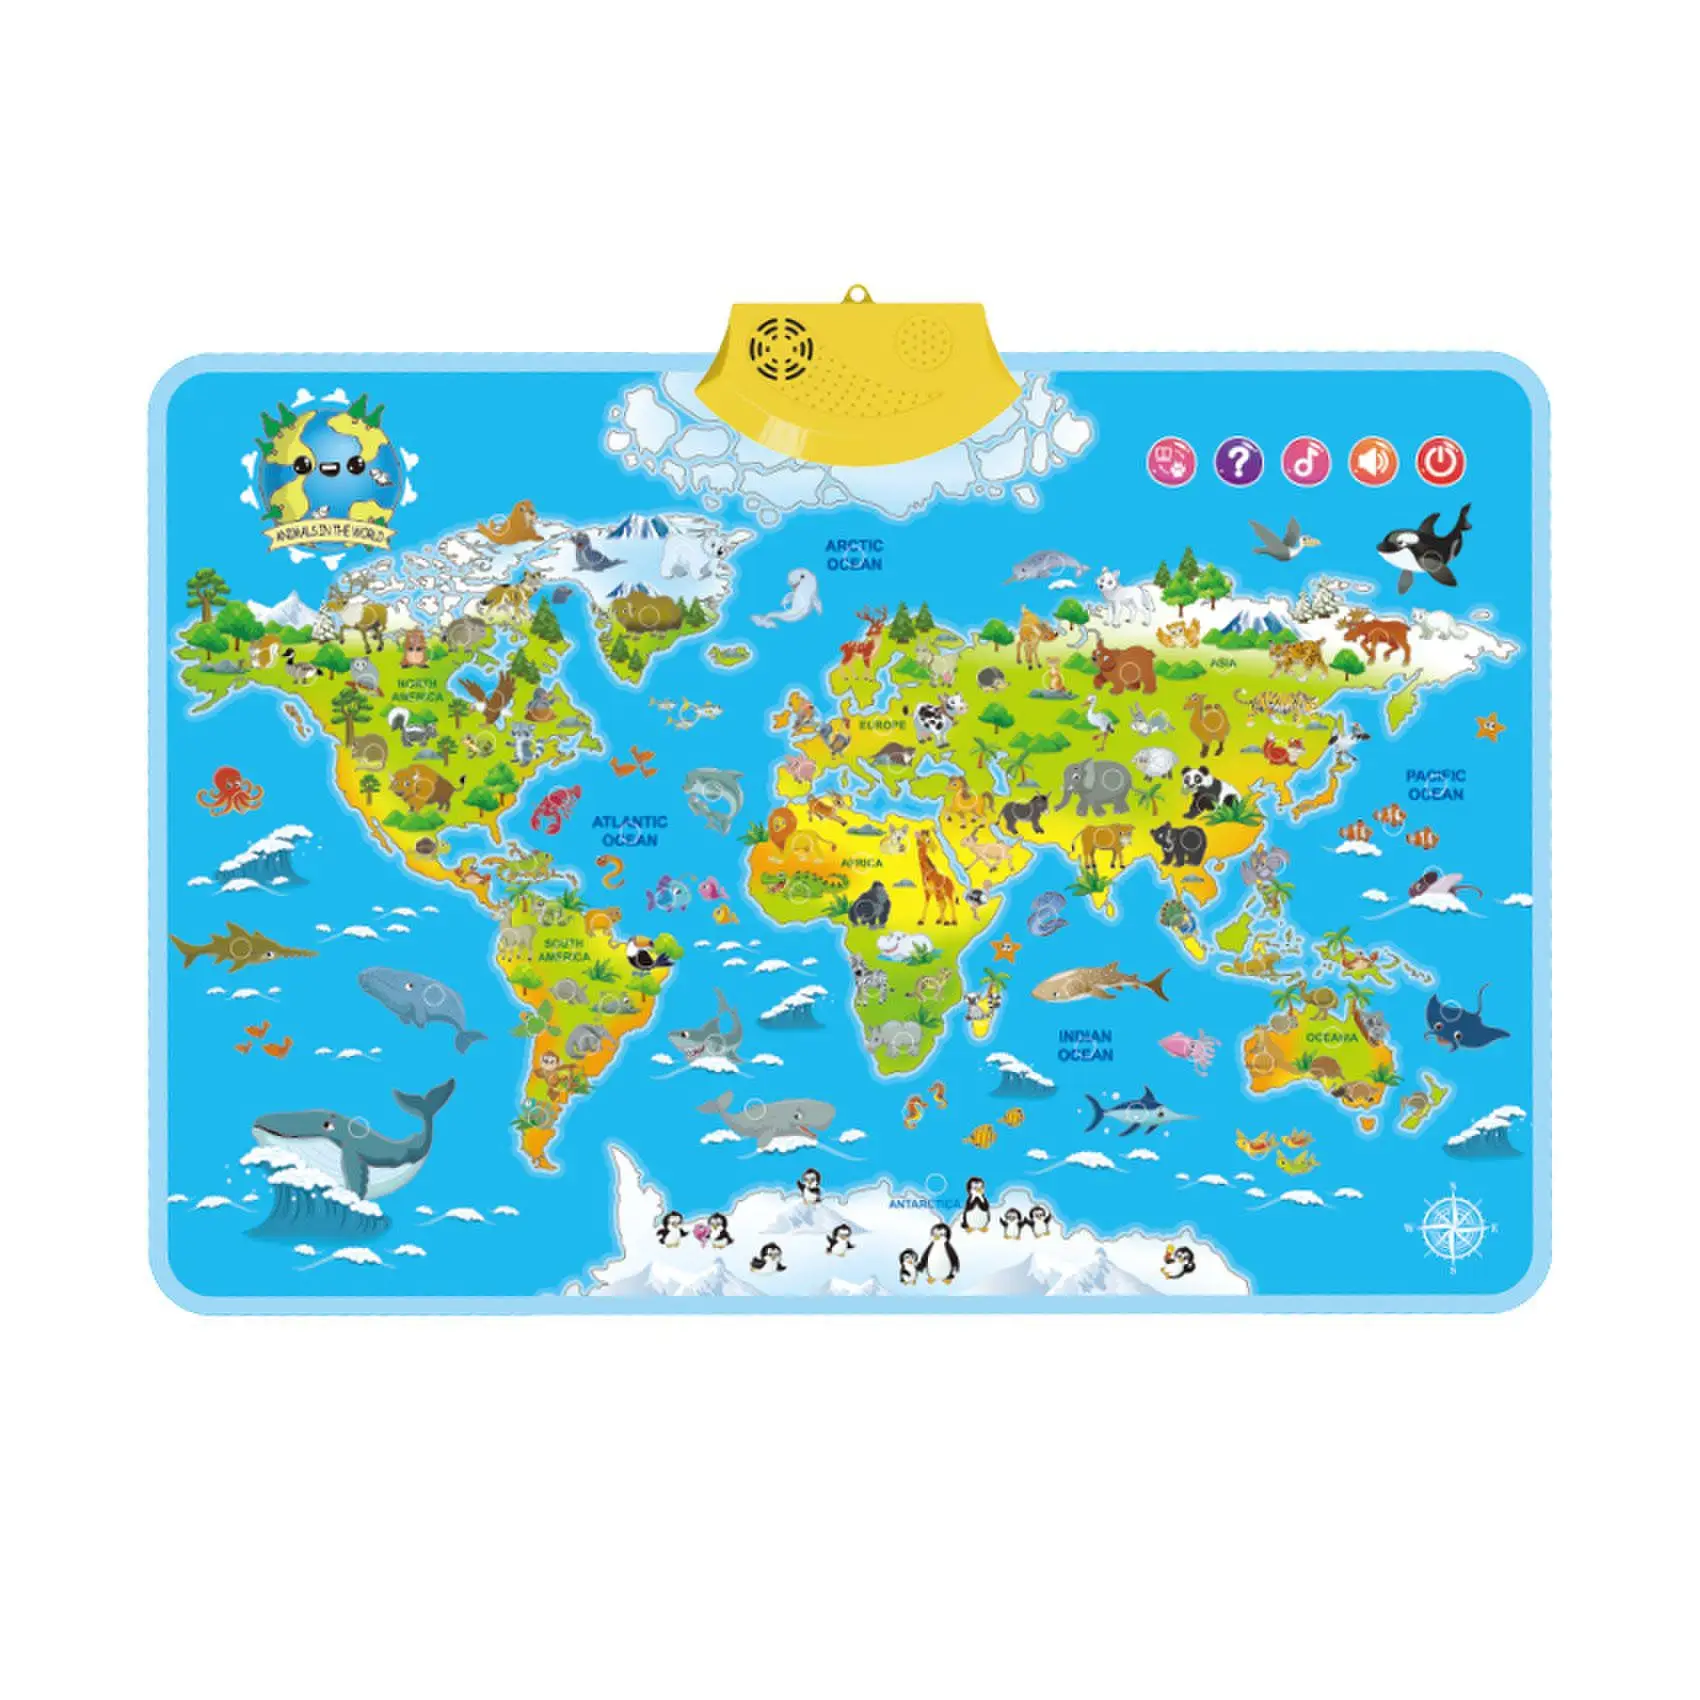 My World Interactive Map geografia Educational Talking Poster Toy Flags Of The World wallchairs For Toddlers